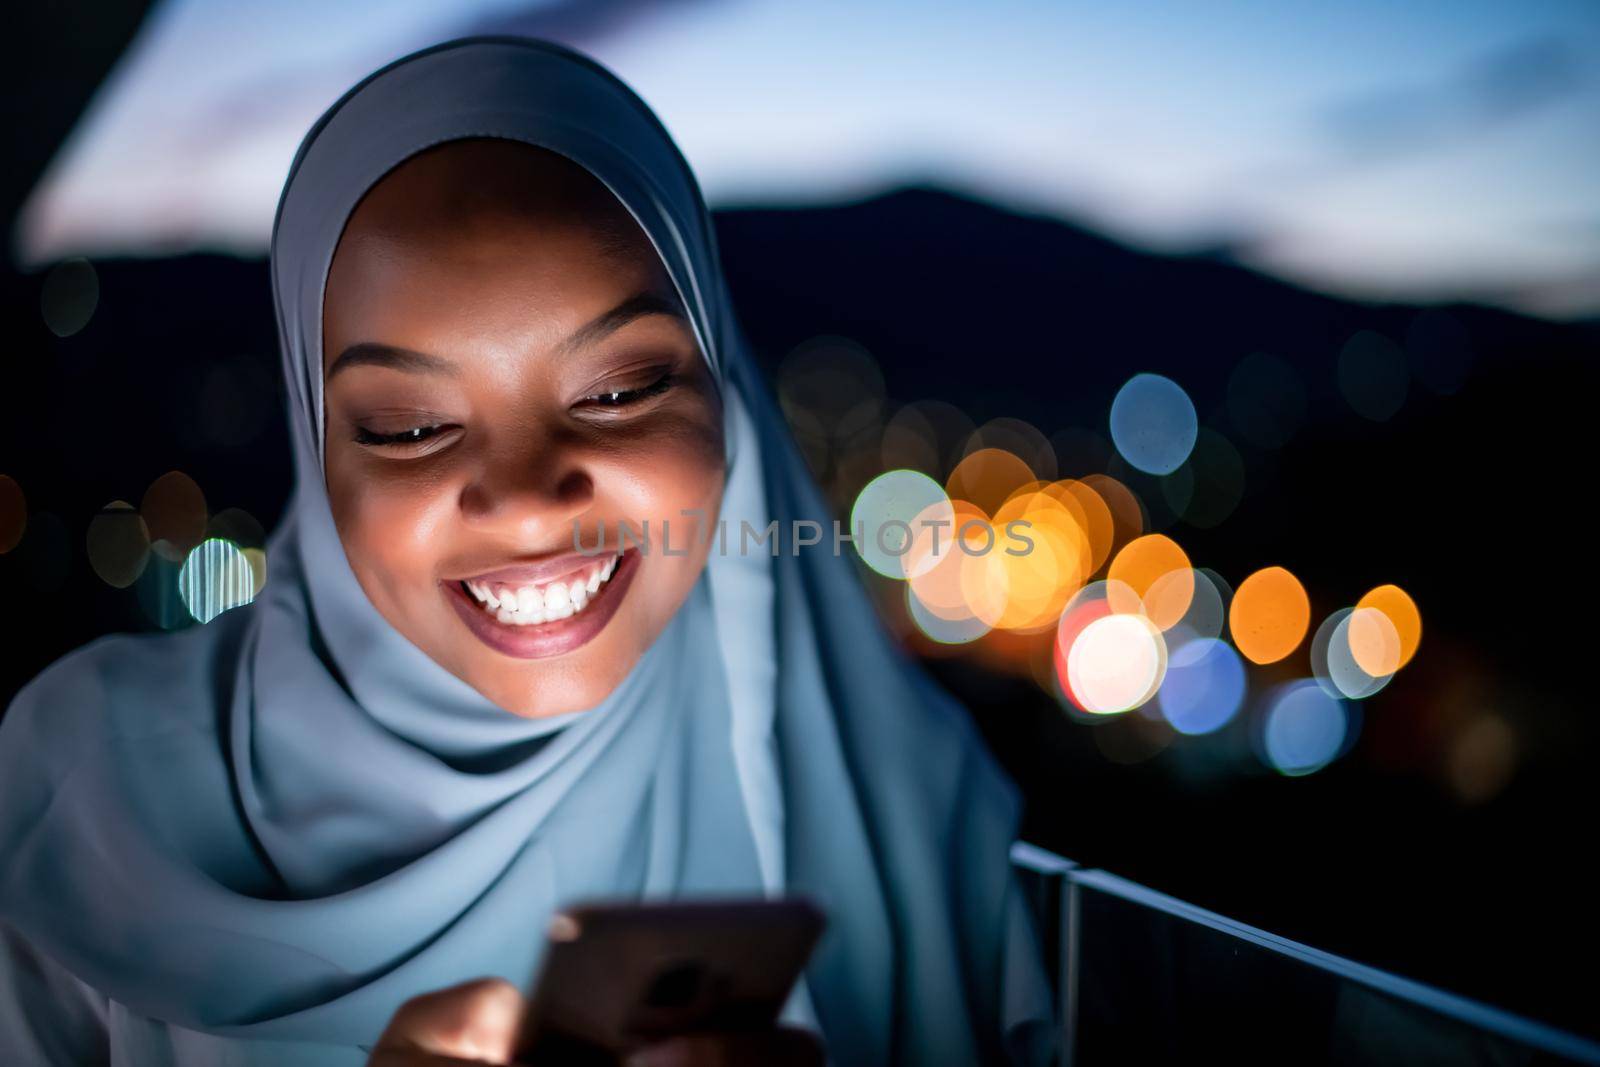 Young modern Muslim woman wearing scarf veil on urban city  street at night texting on smartphone with bokeh city light in background